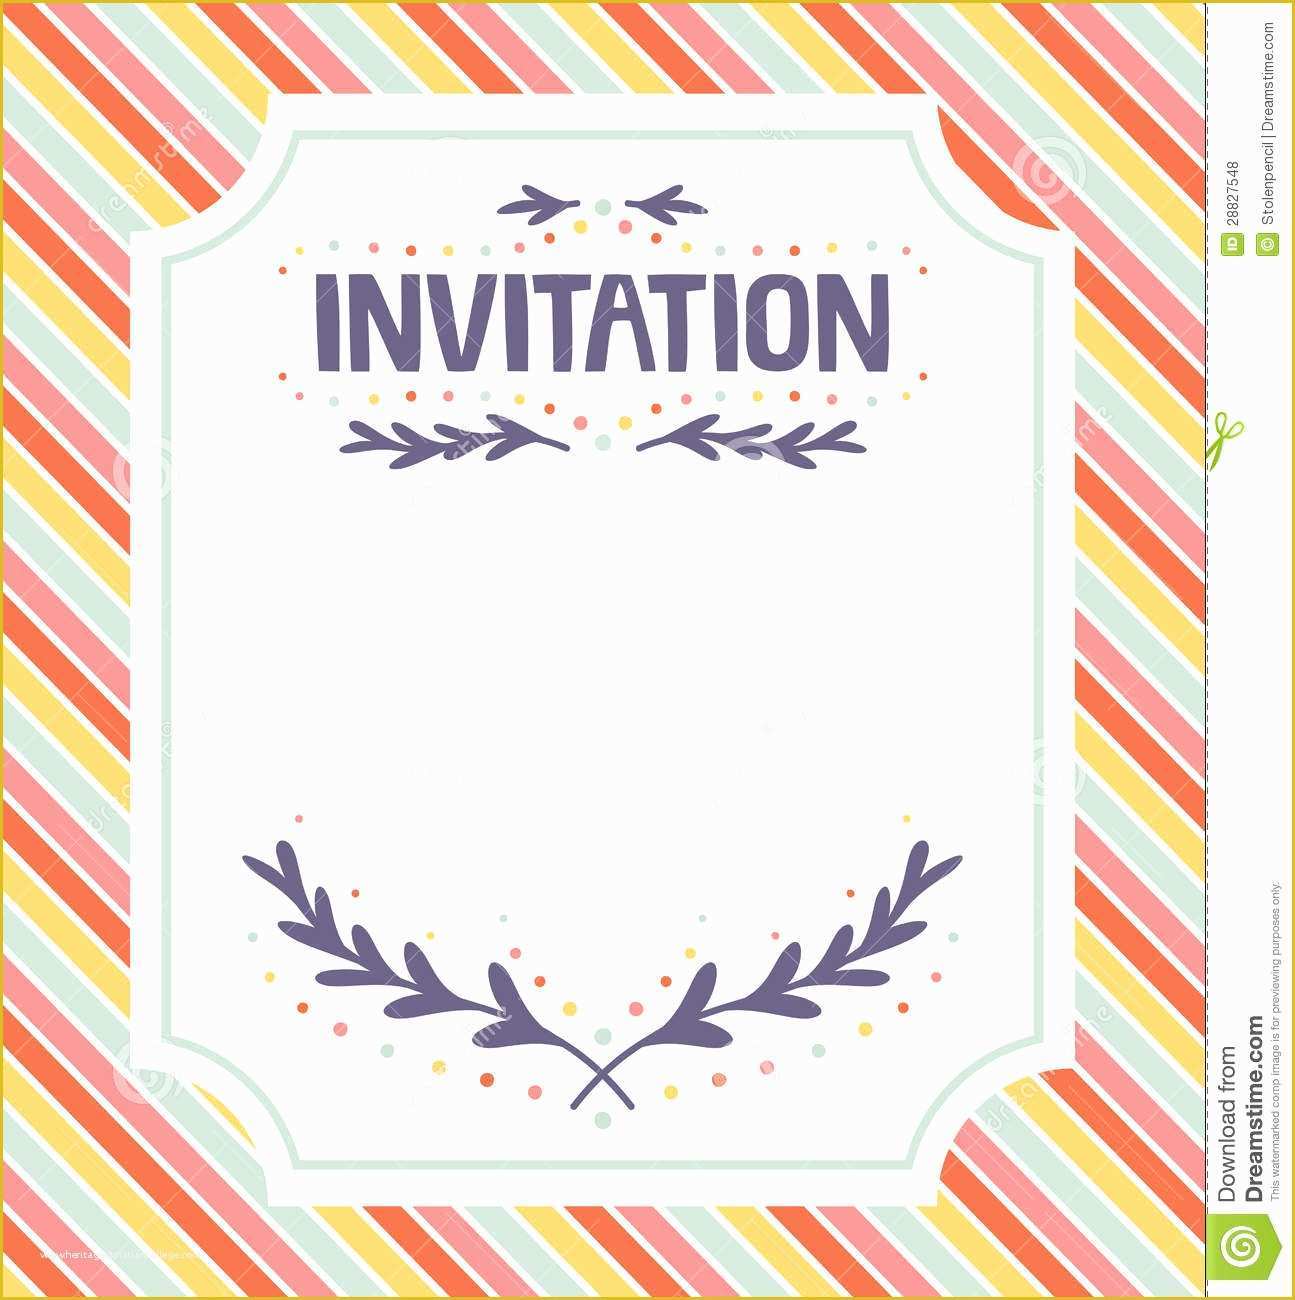 Free Photo Party Invitation Templates Of Invitation Template Stock Vector Illustration Of Occasion